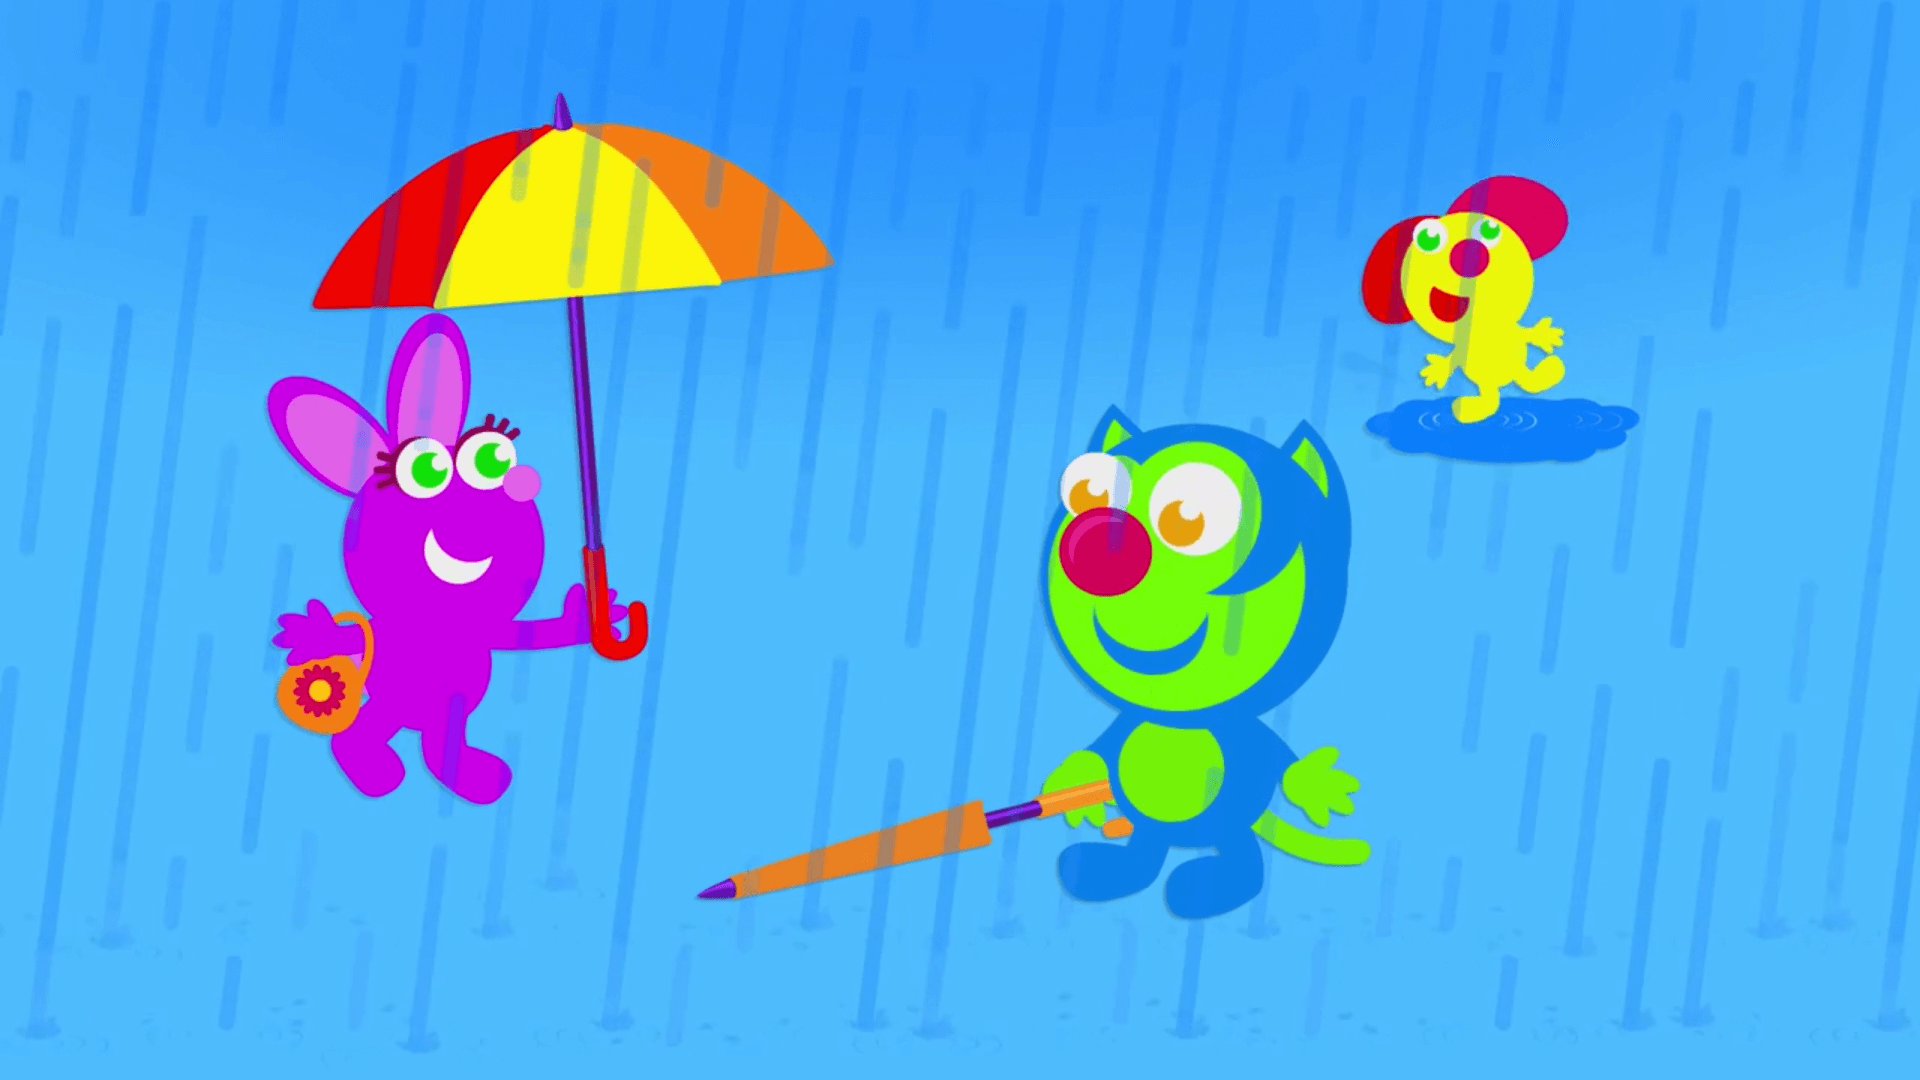 slycat tries to use umbrella in the rain on splish splash episode of the kneebouncers show on babyfirst